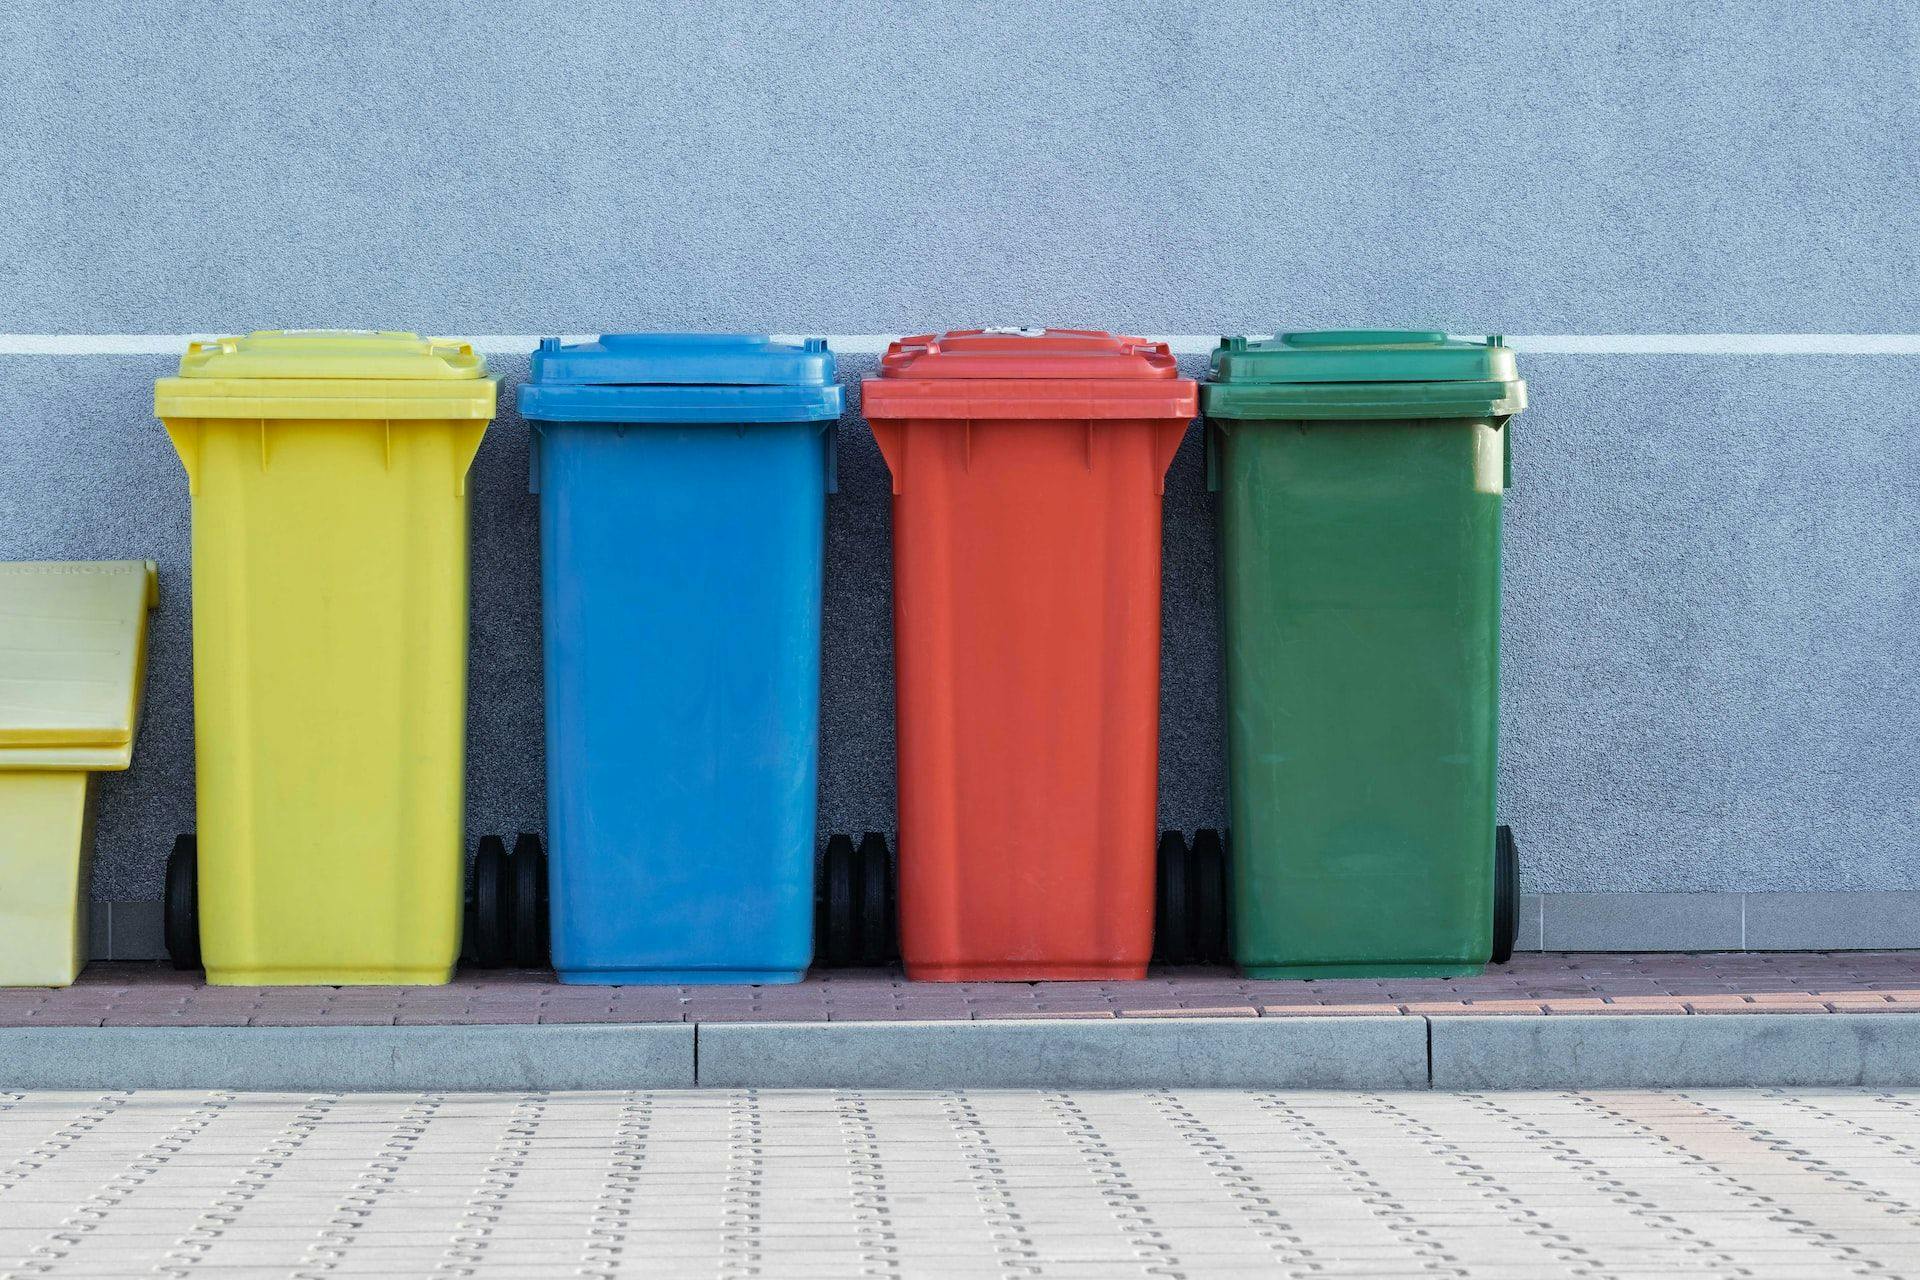 Trash is an increasingly serious issue in Luxembourg